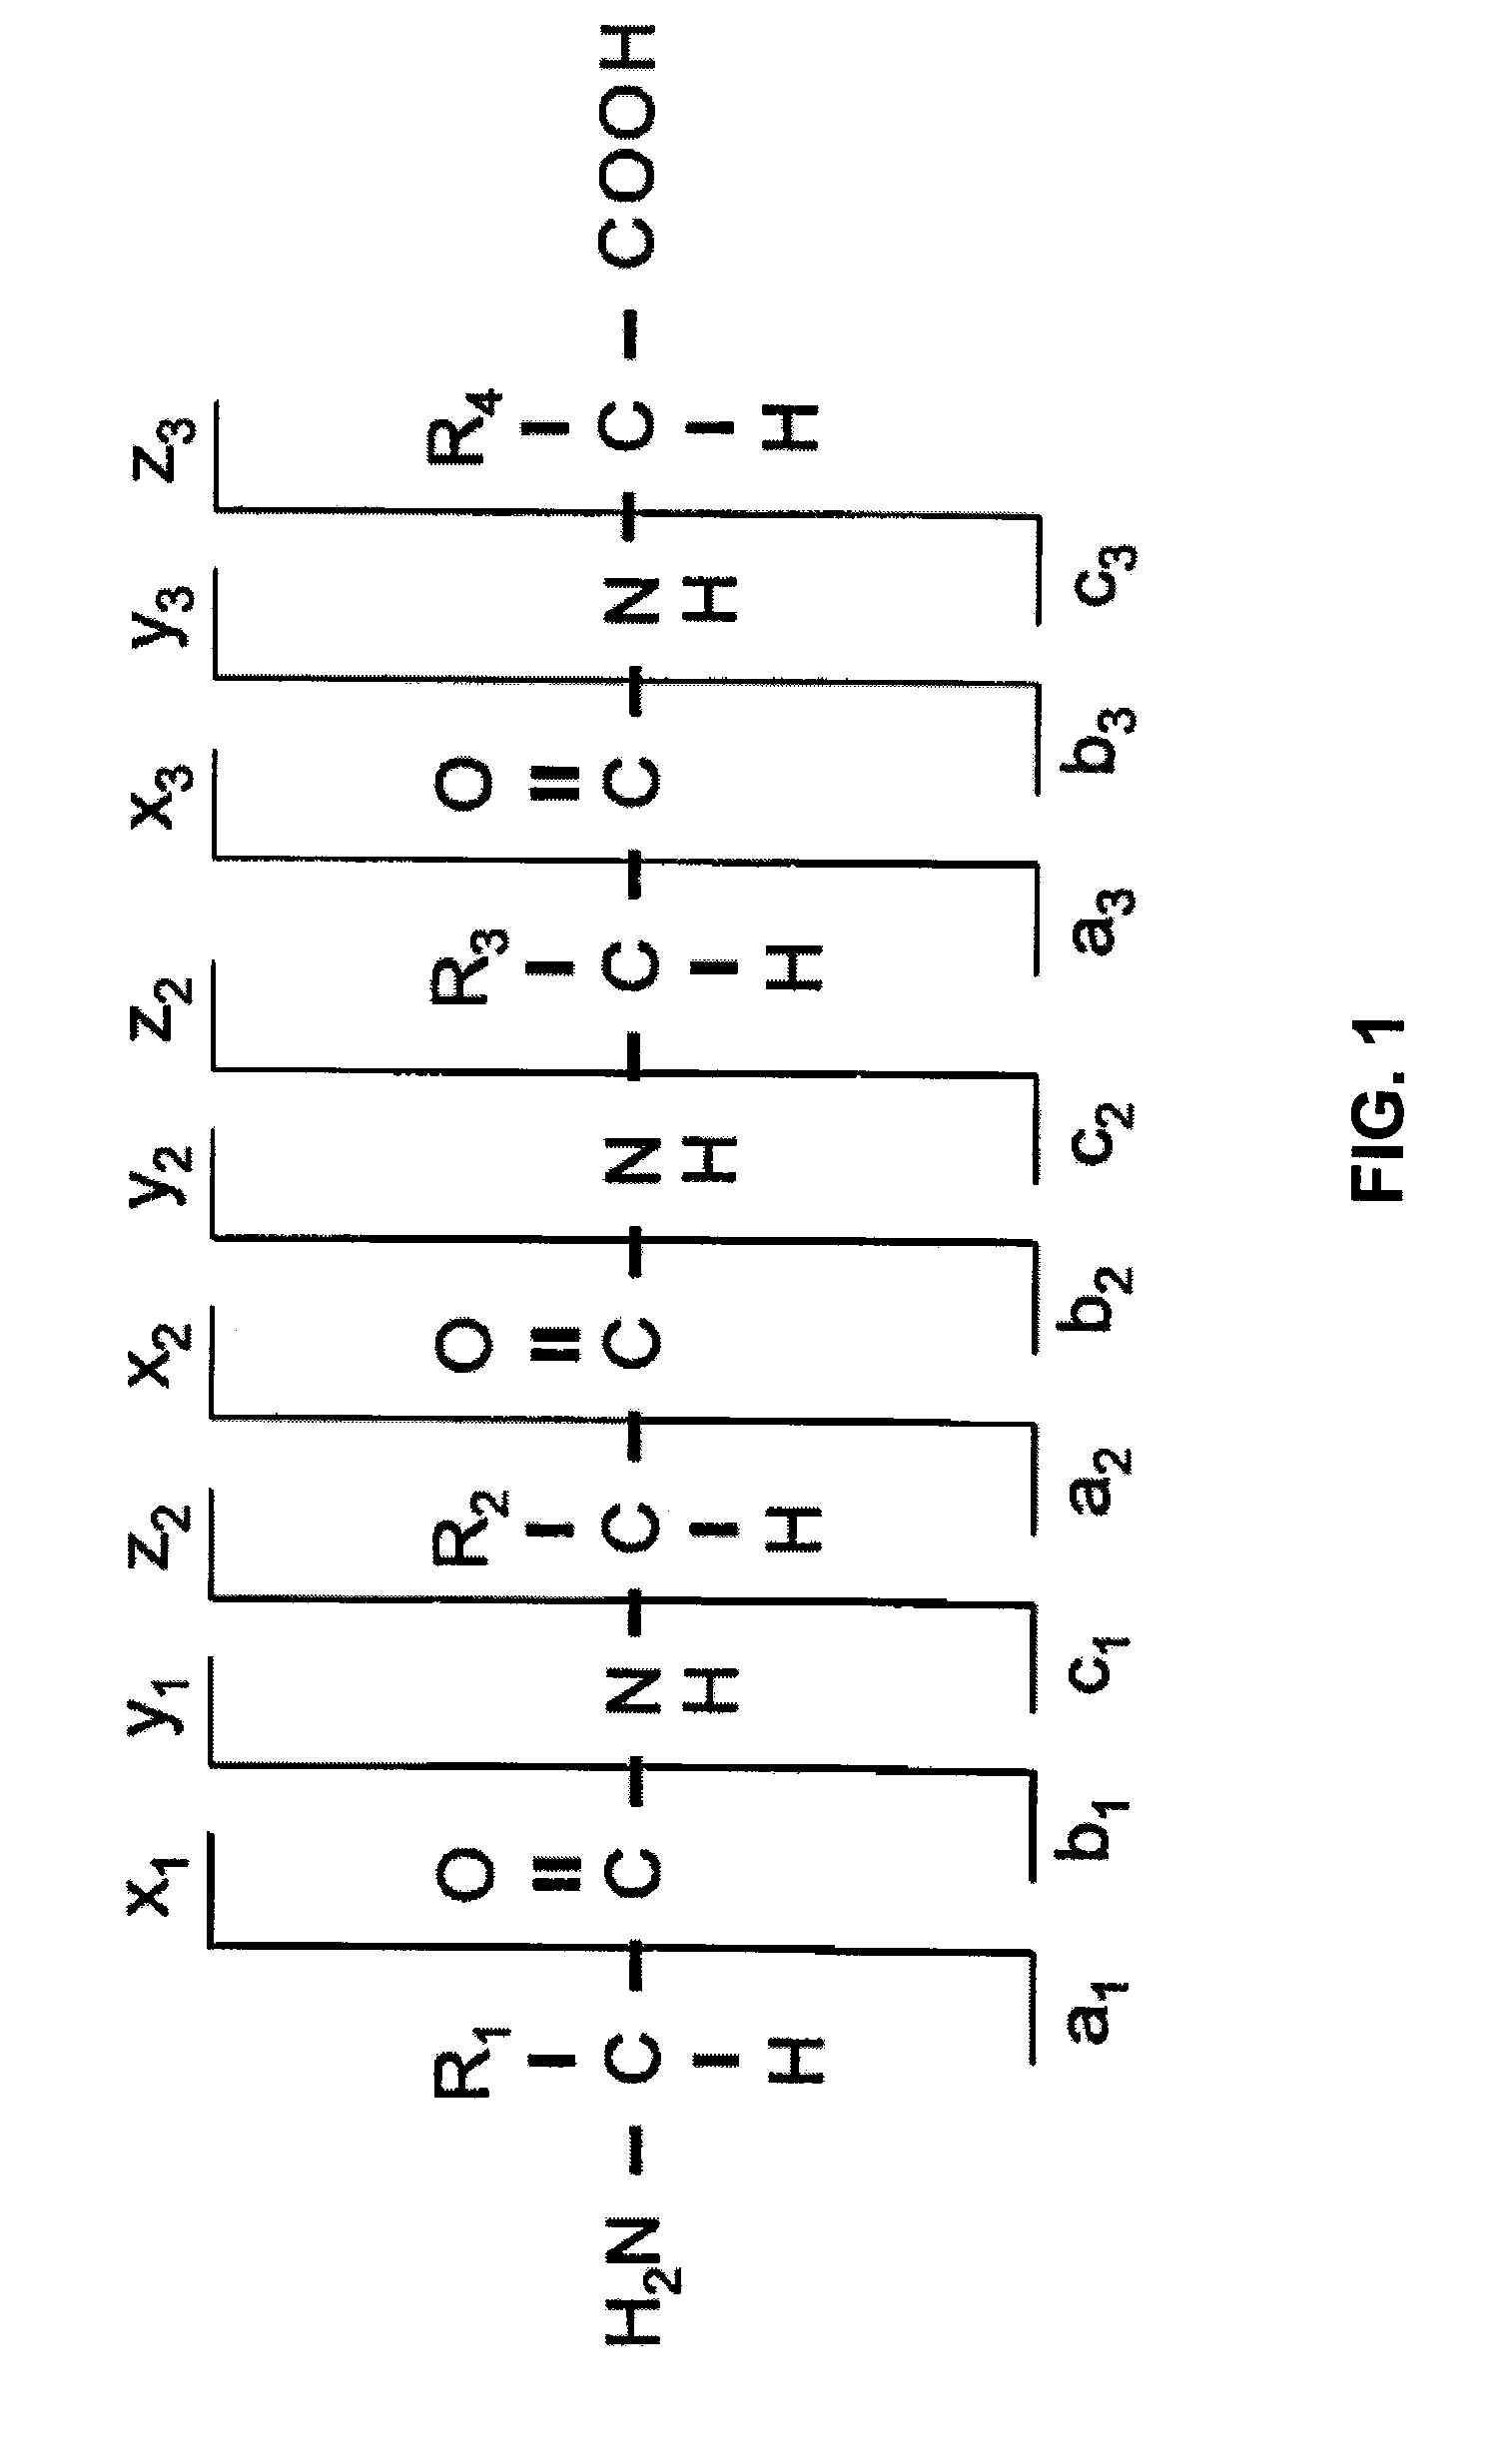 Methods for Acquisition and Deductive Analysis of Mixed Fragment Peptide Mass Spectra